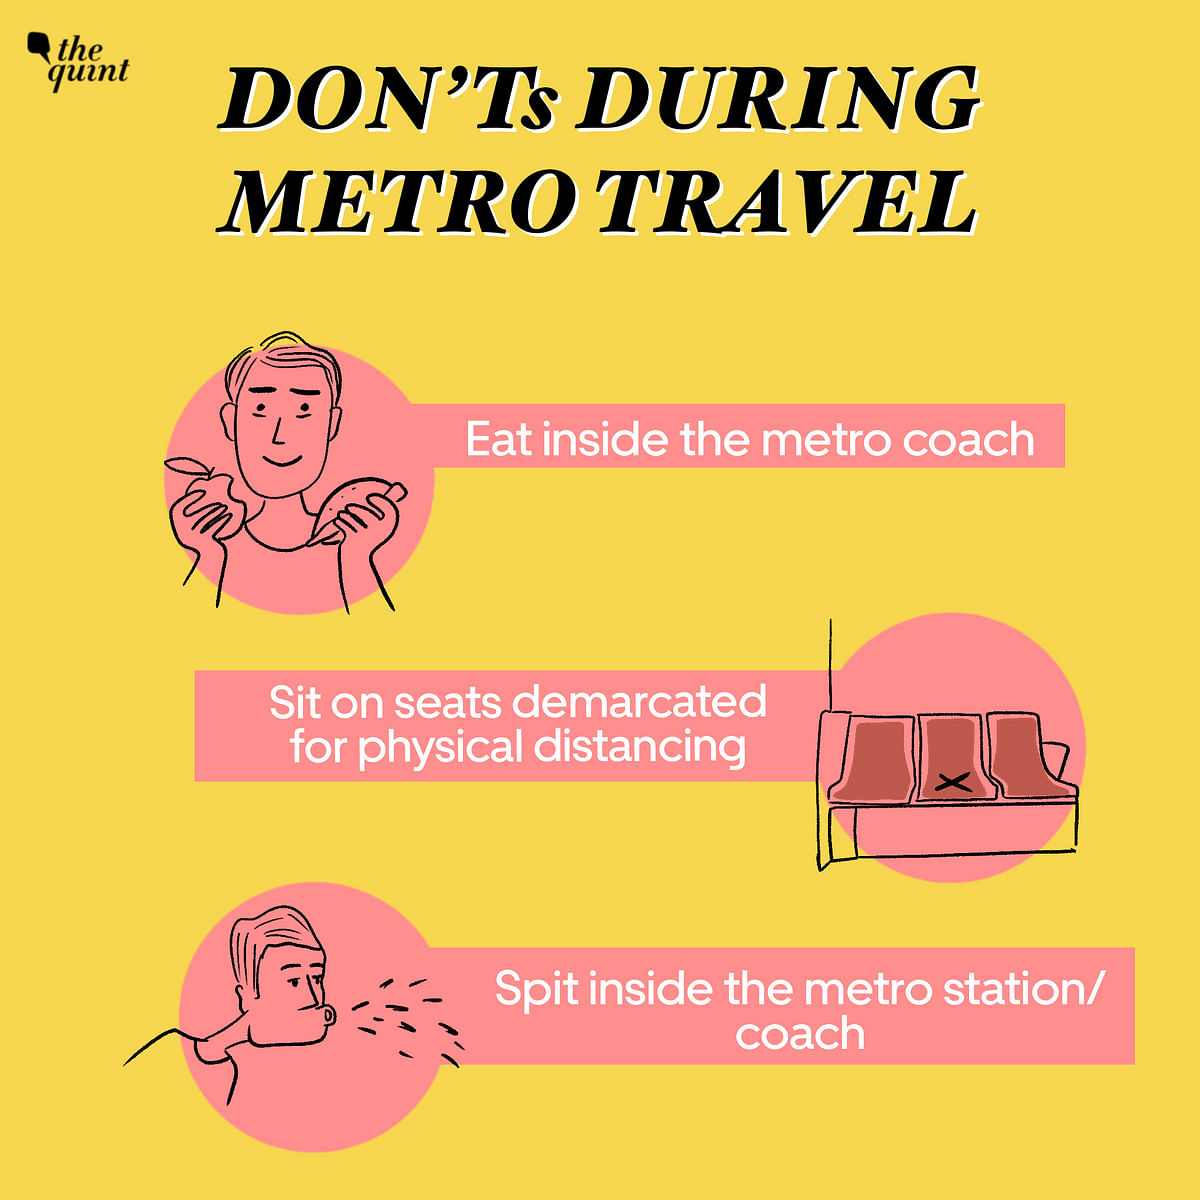 If you are planning to travel by metro, once the service resumes, here are the dos and don’ts you must follow.